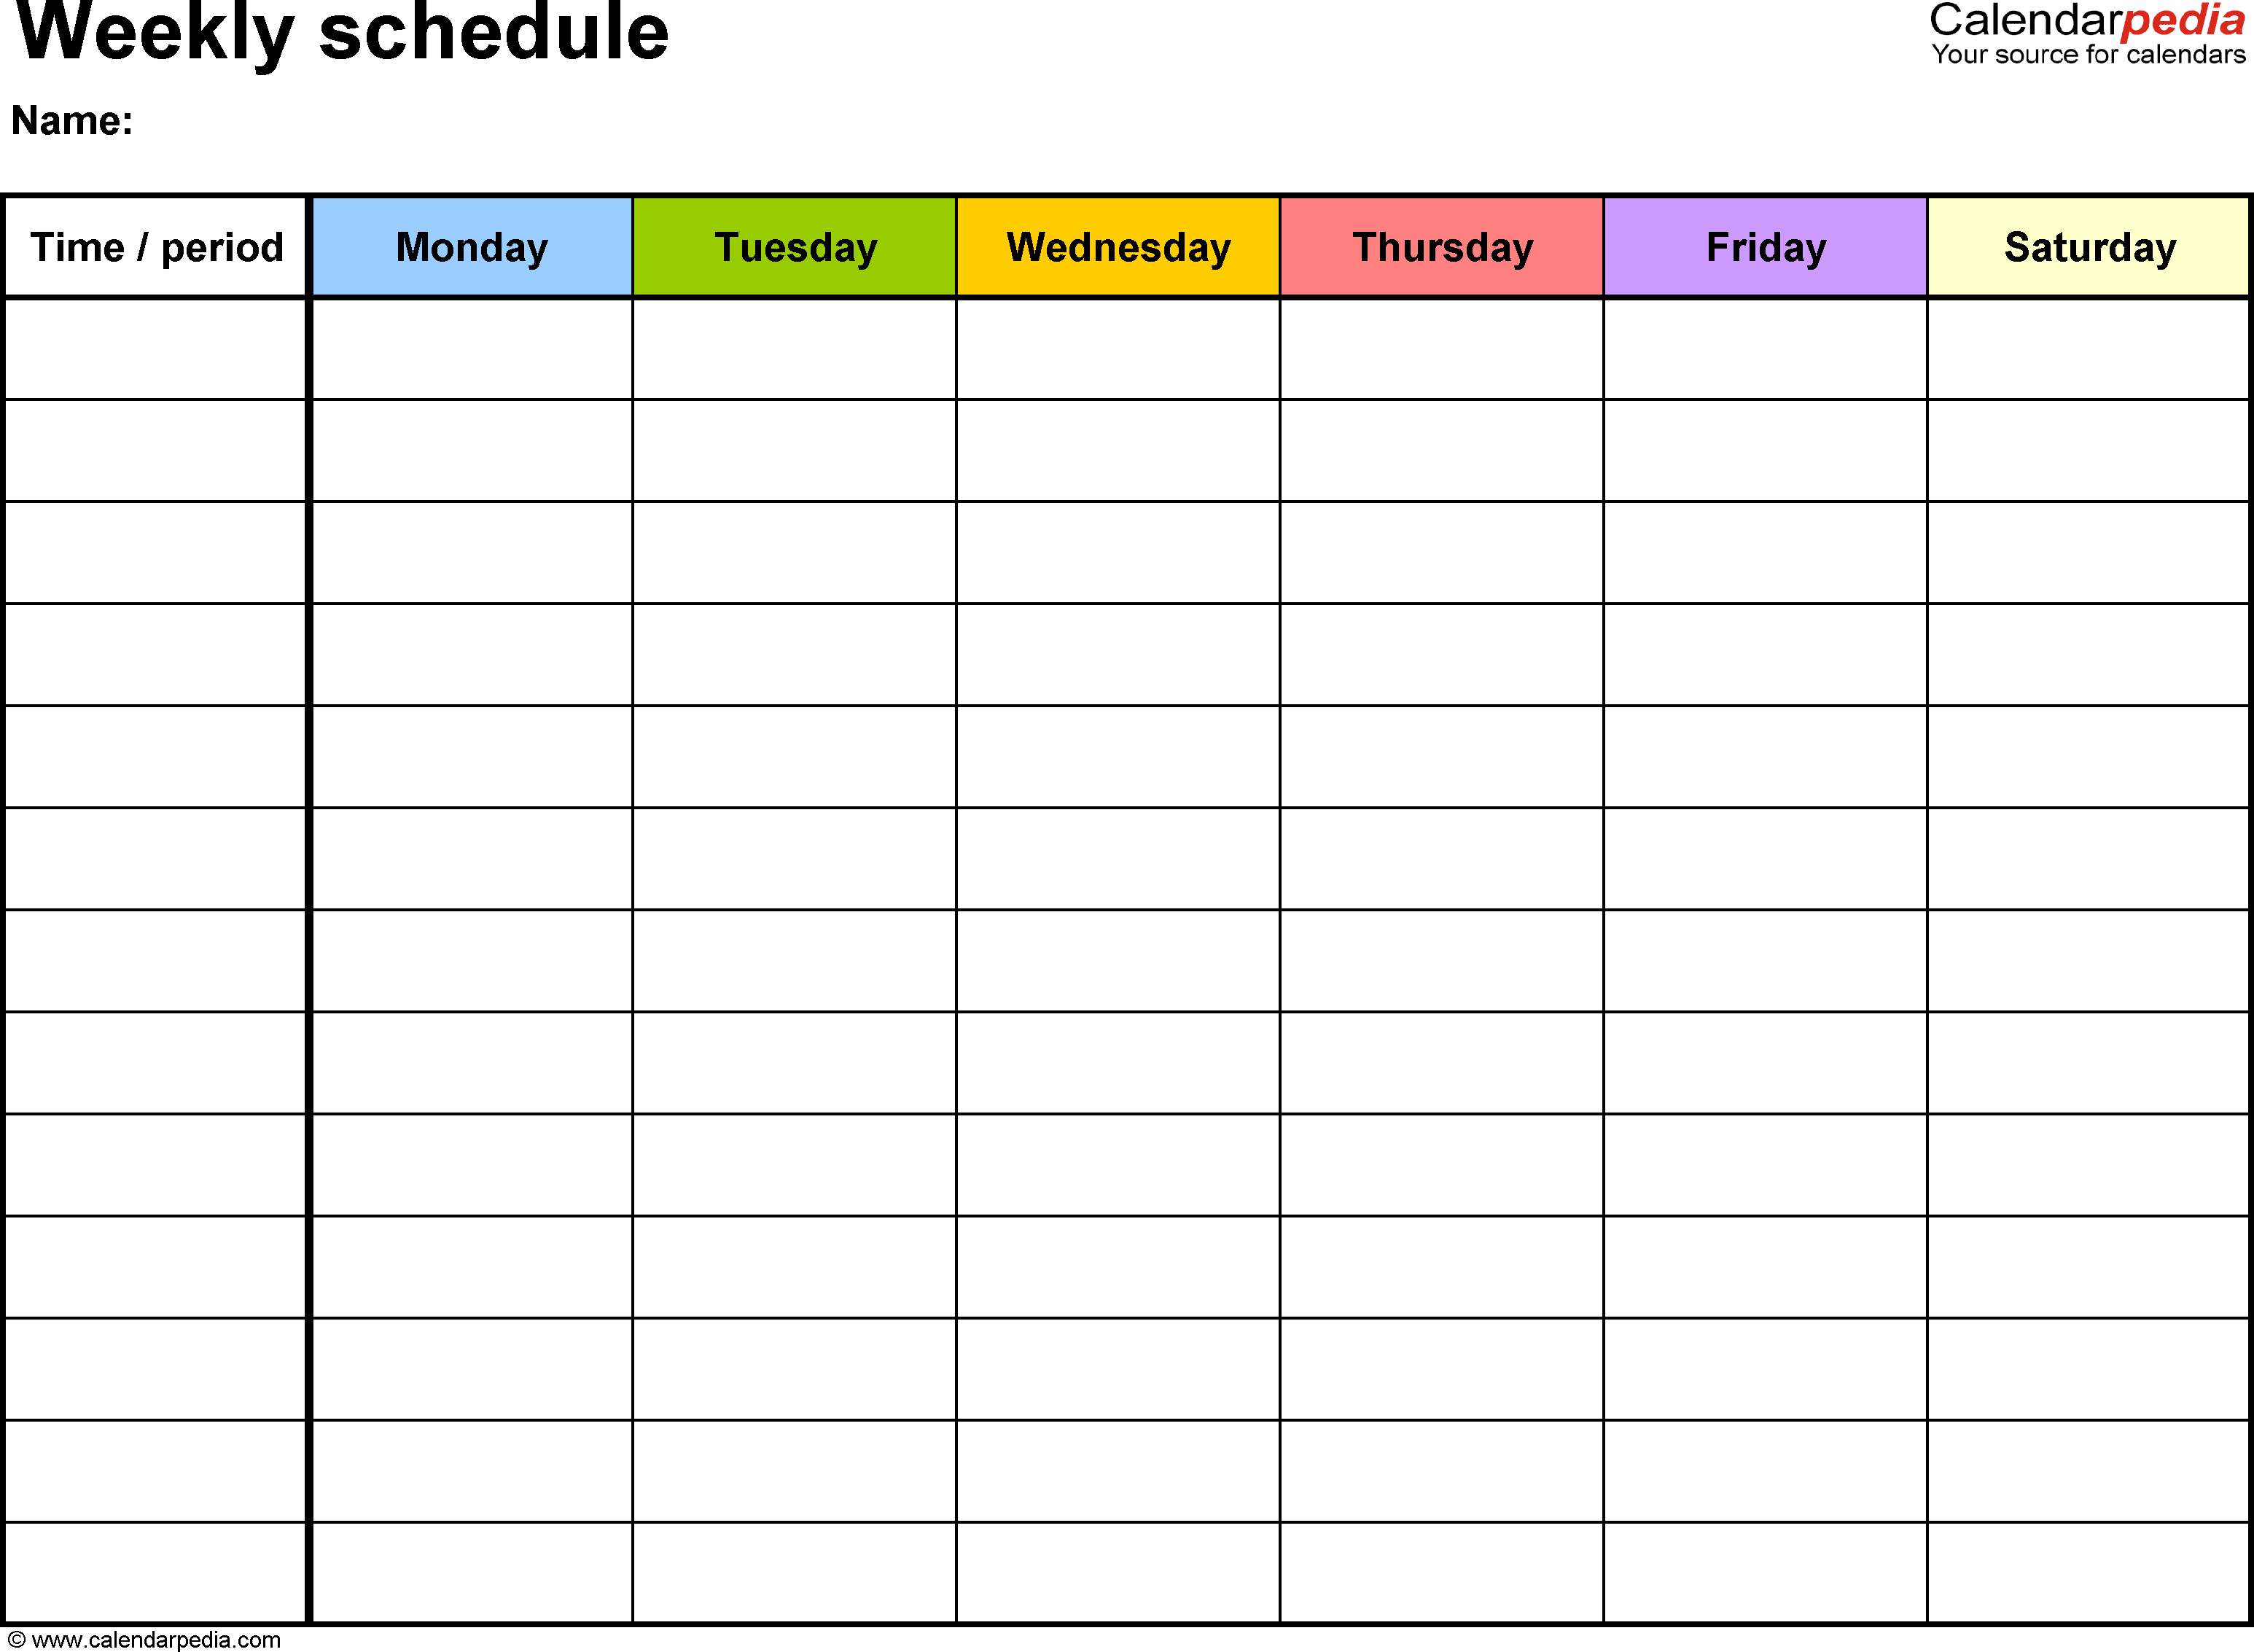 Schedule Timetable Template